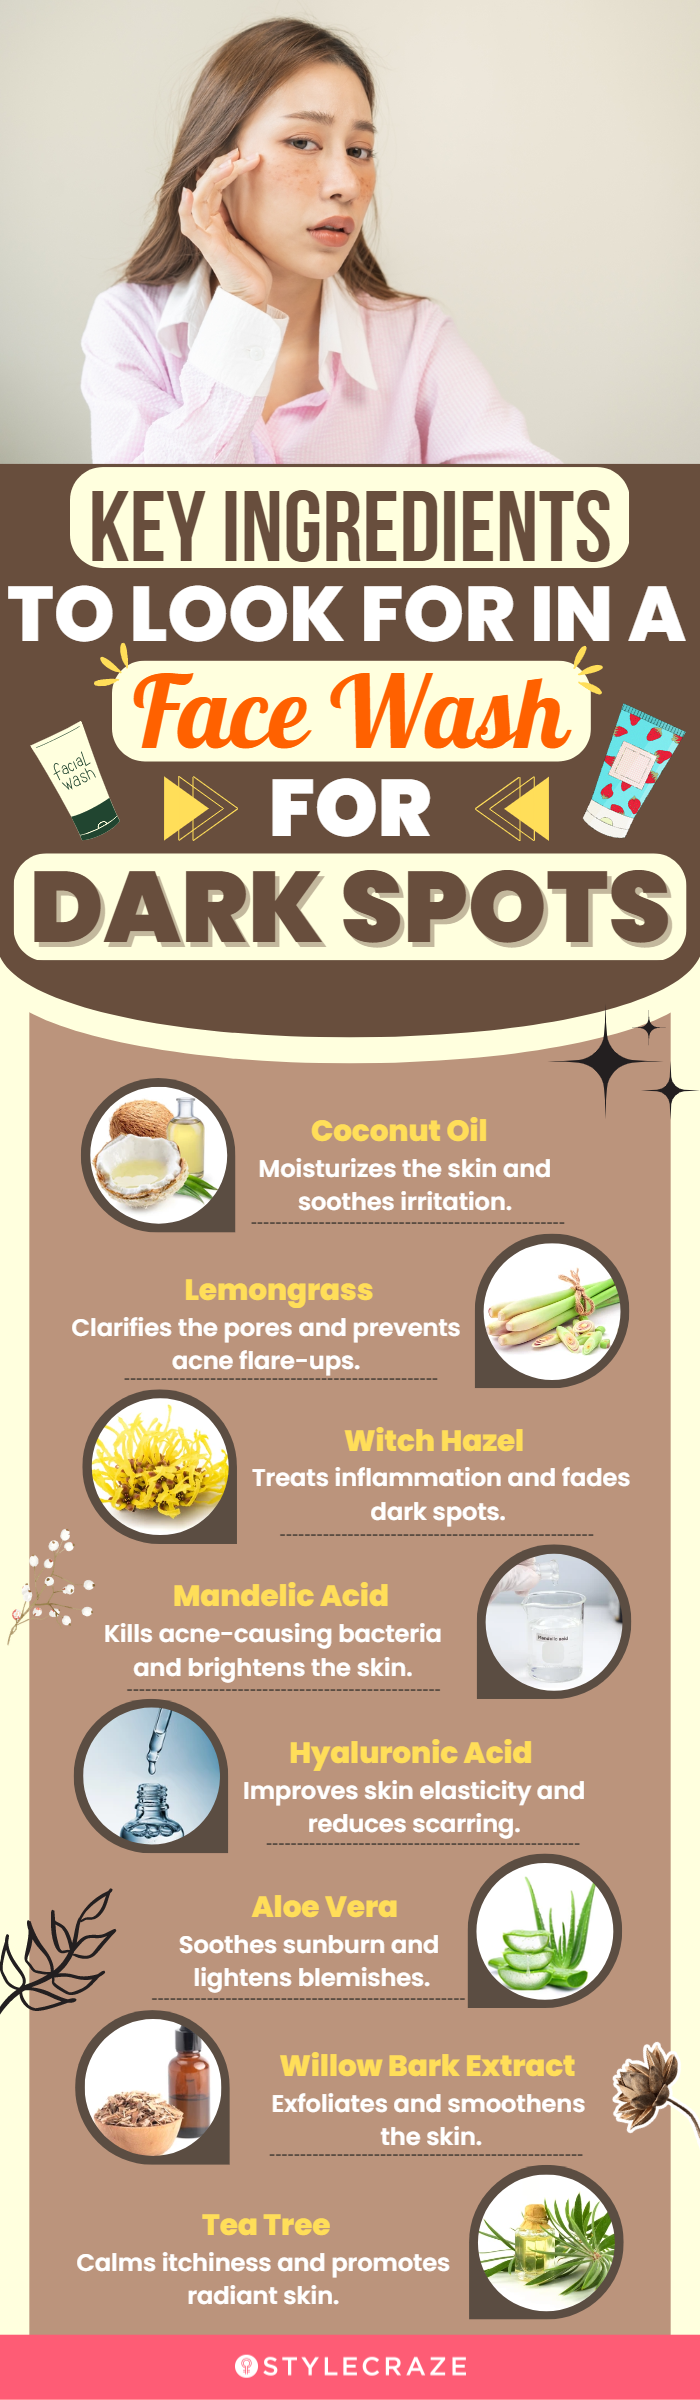 Key Ingredients To Look For In A Face Wash For Dark Spots (infographic)